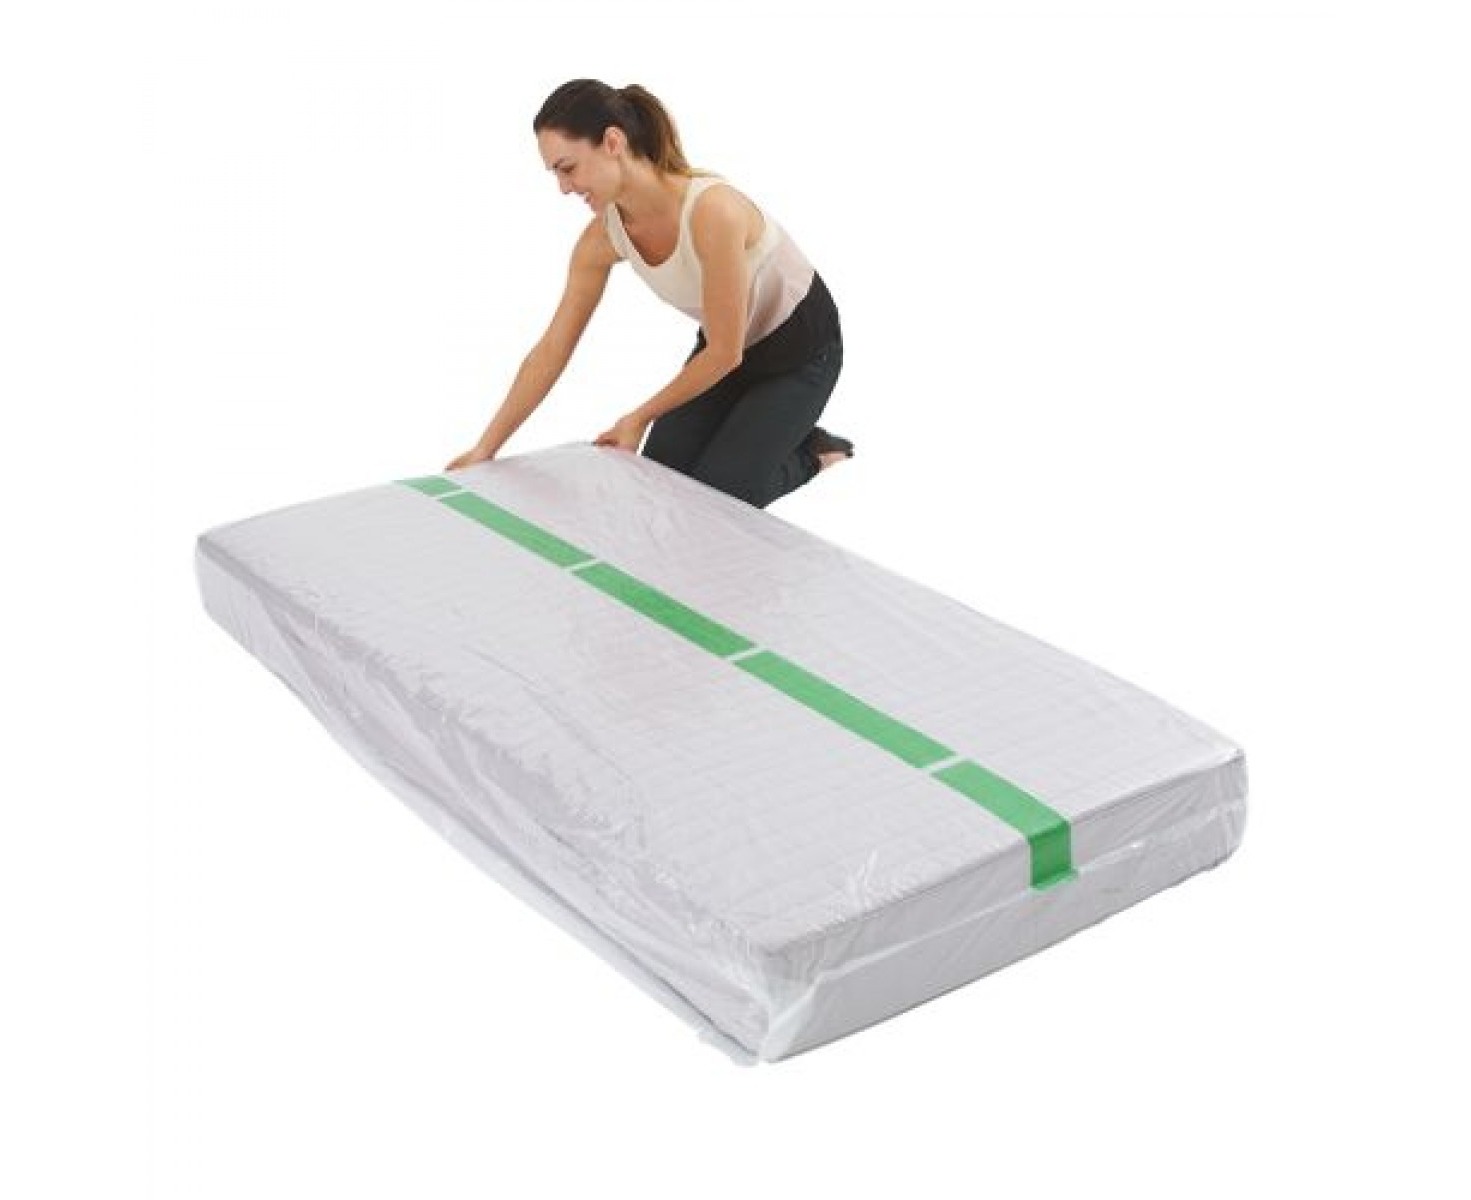 mattress protector bag for storage